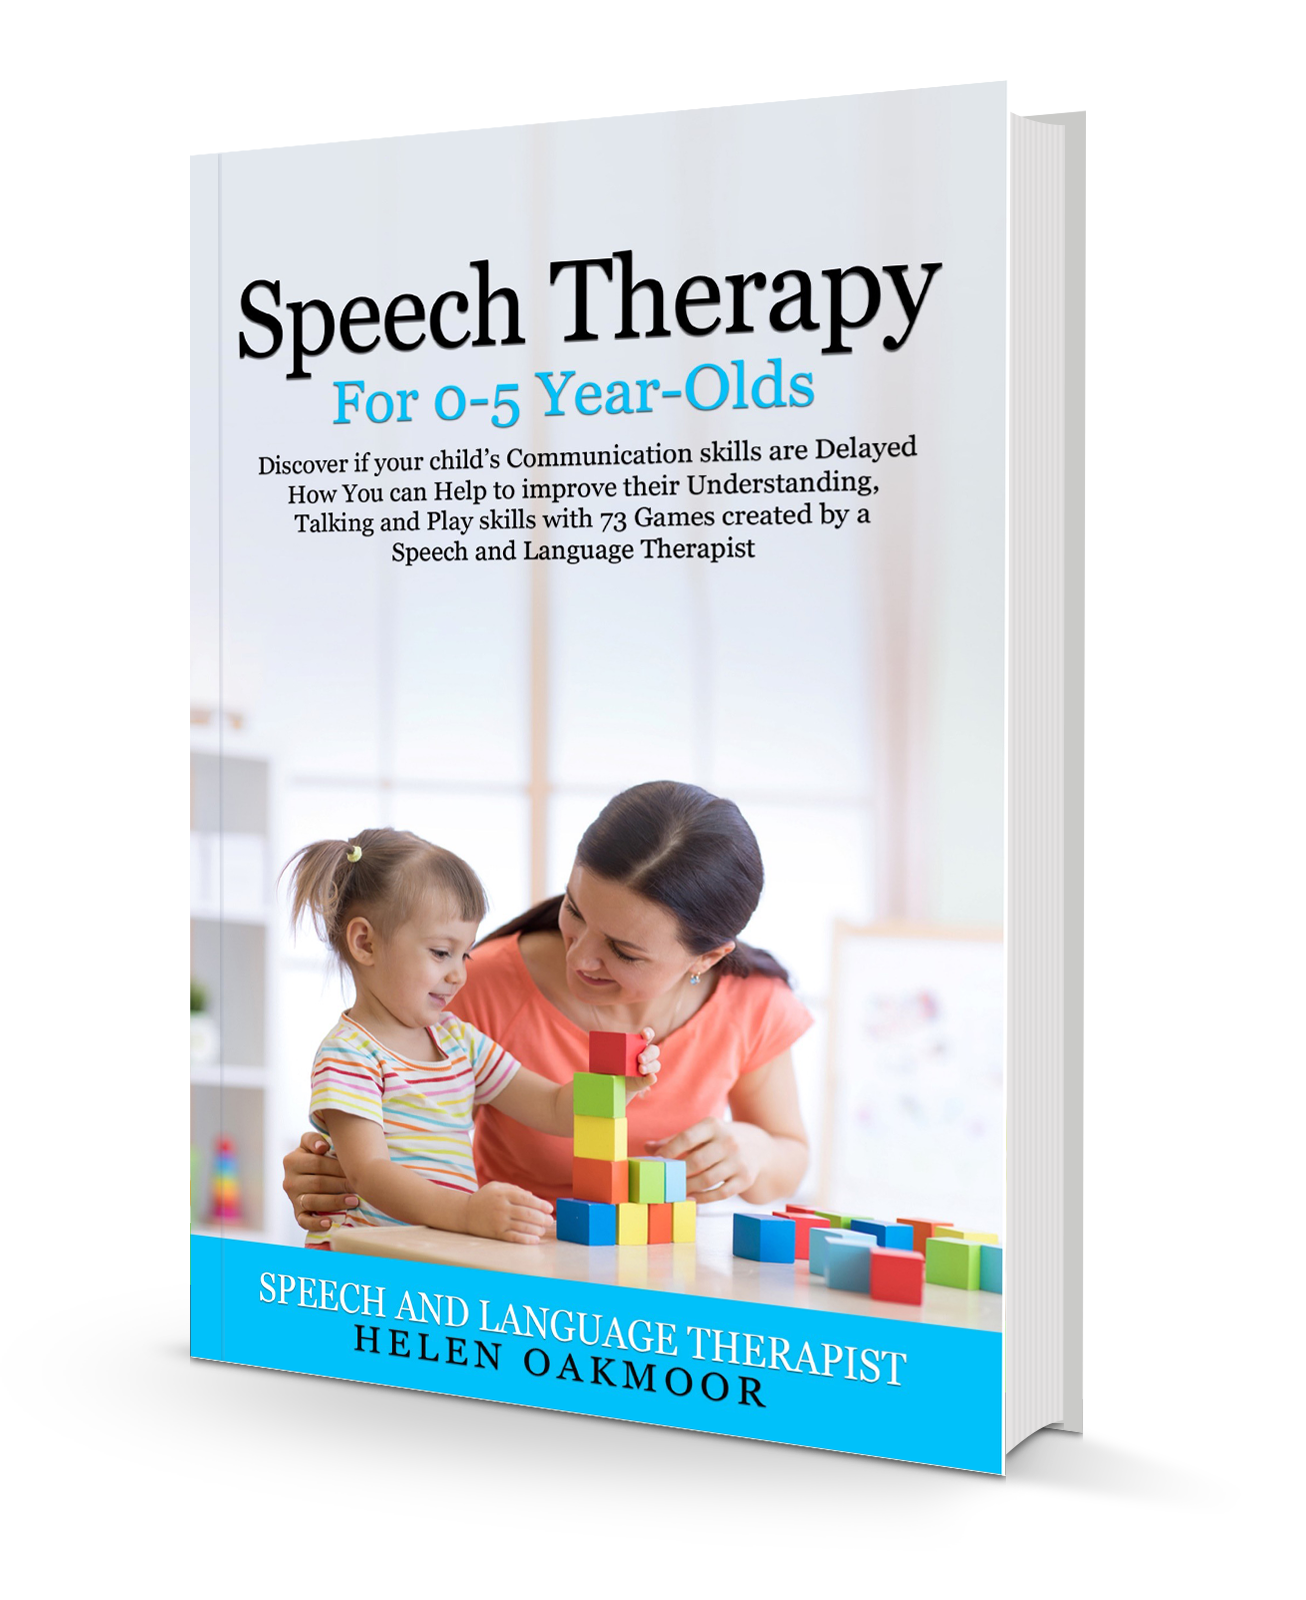 speech-therapy-for-0-5-year-olds-resources-kids-slt